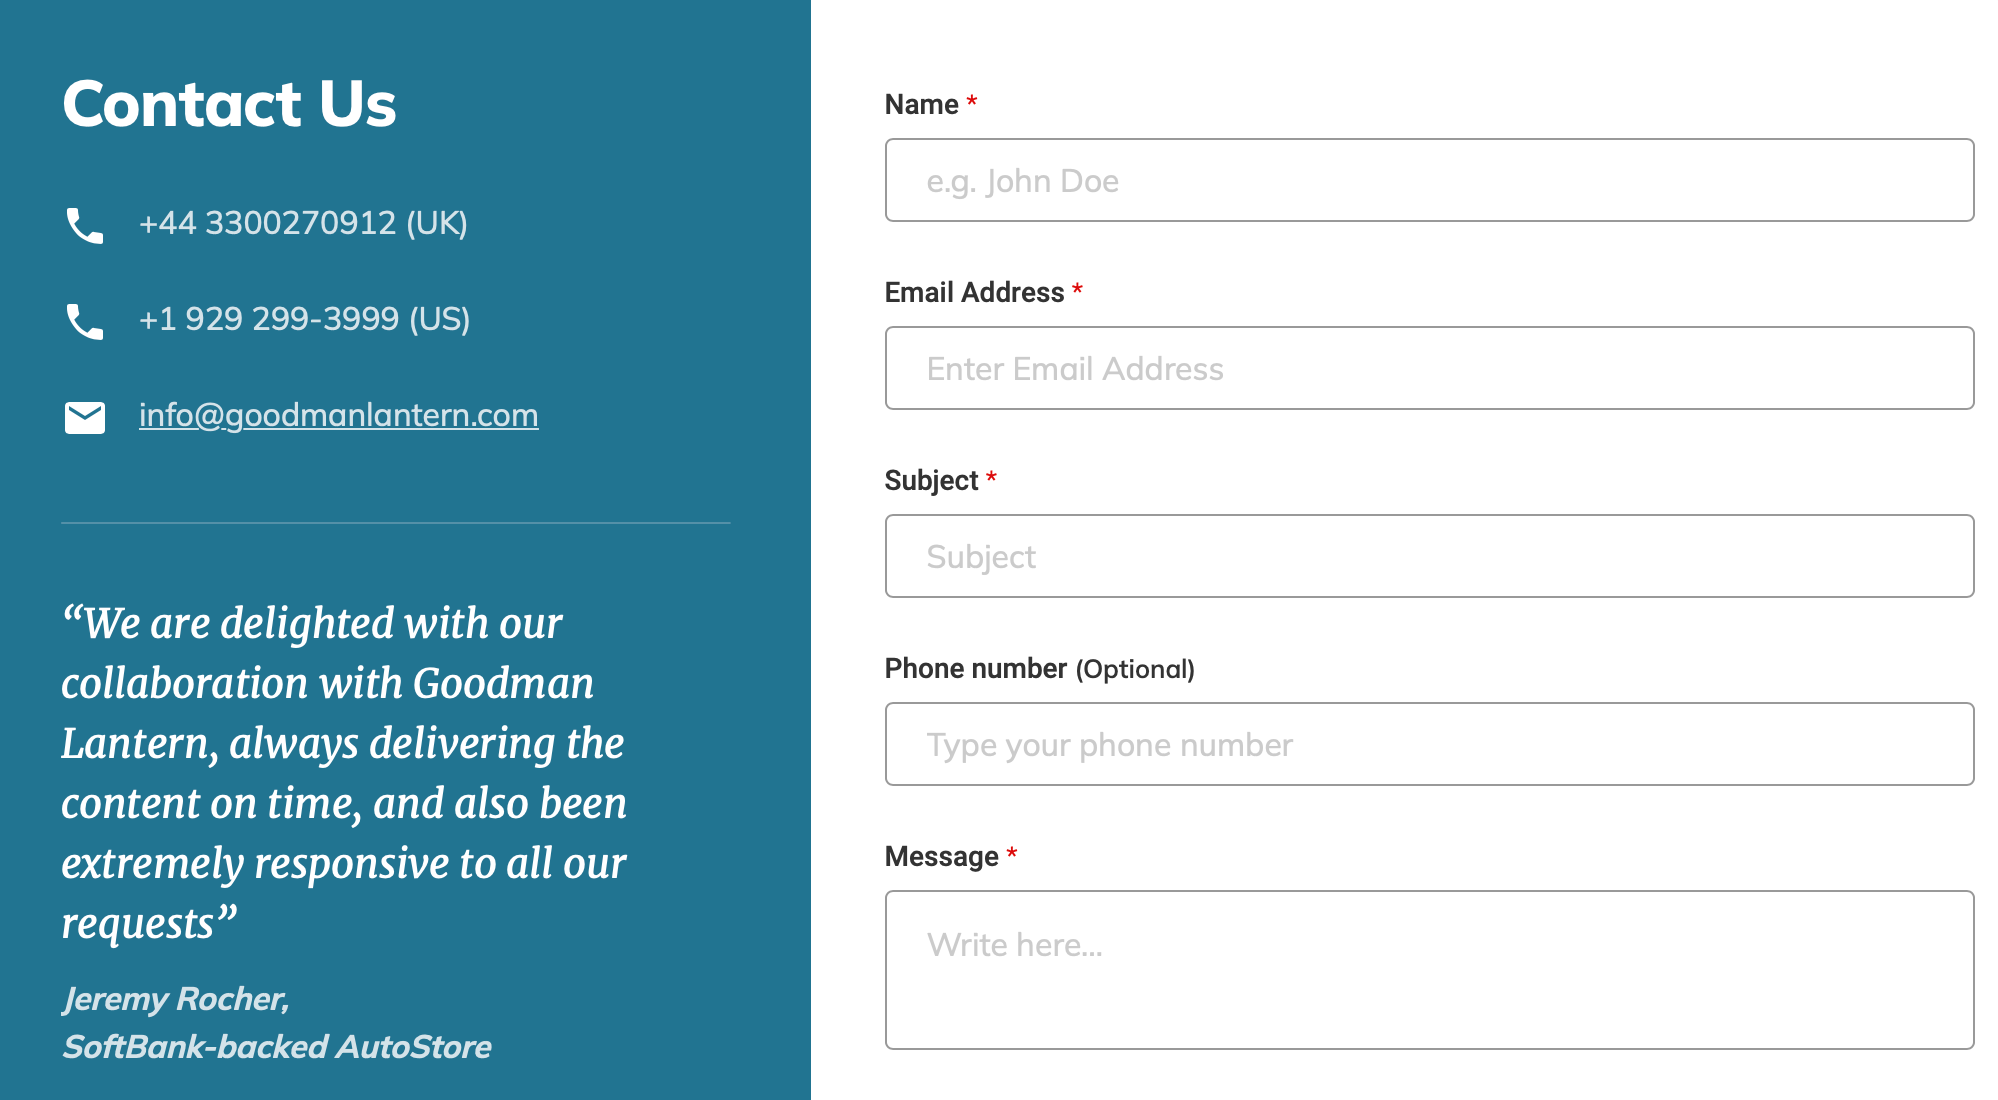 You can contact the customer support managers on Goodmanlantern.com via email and phone.